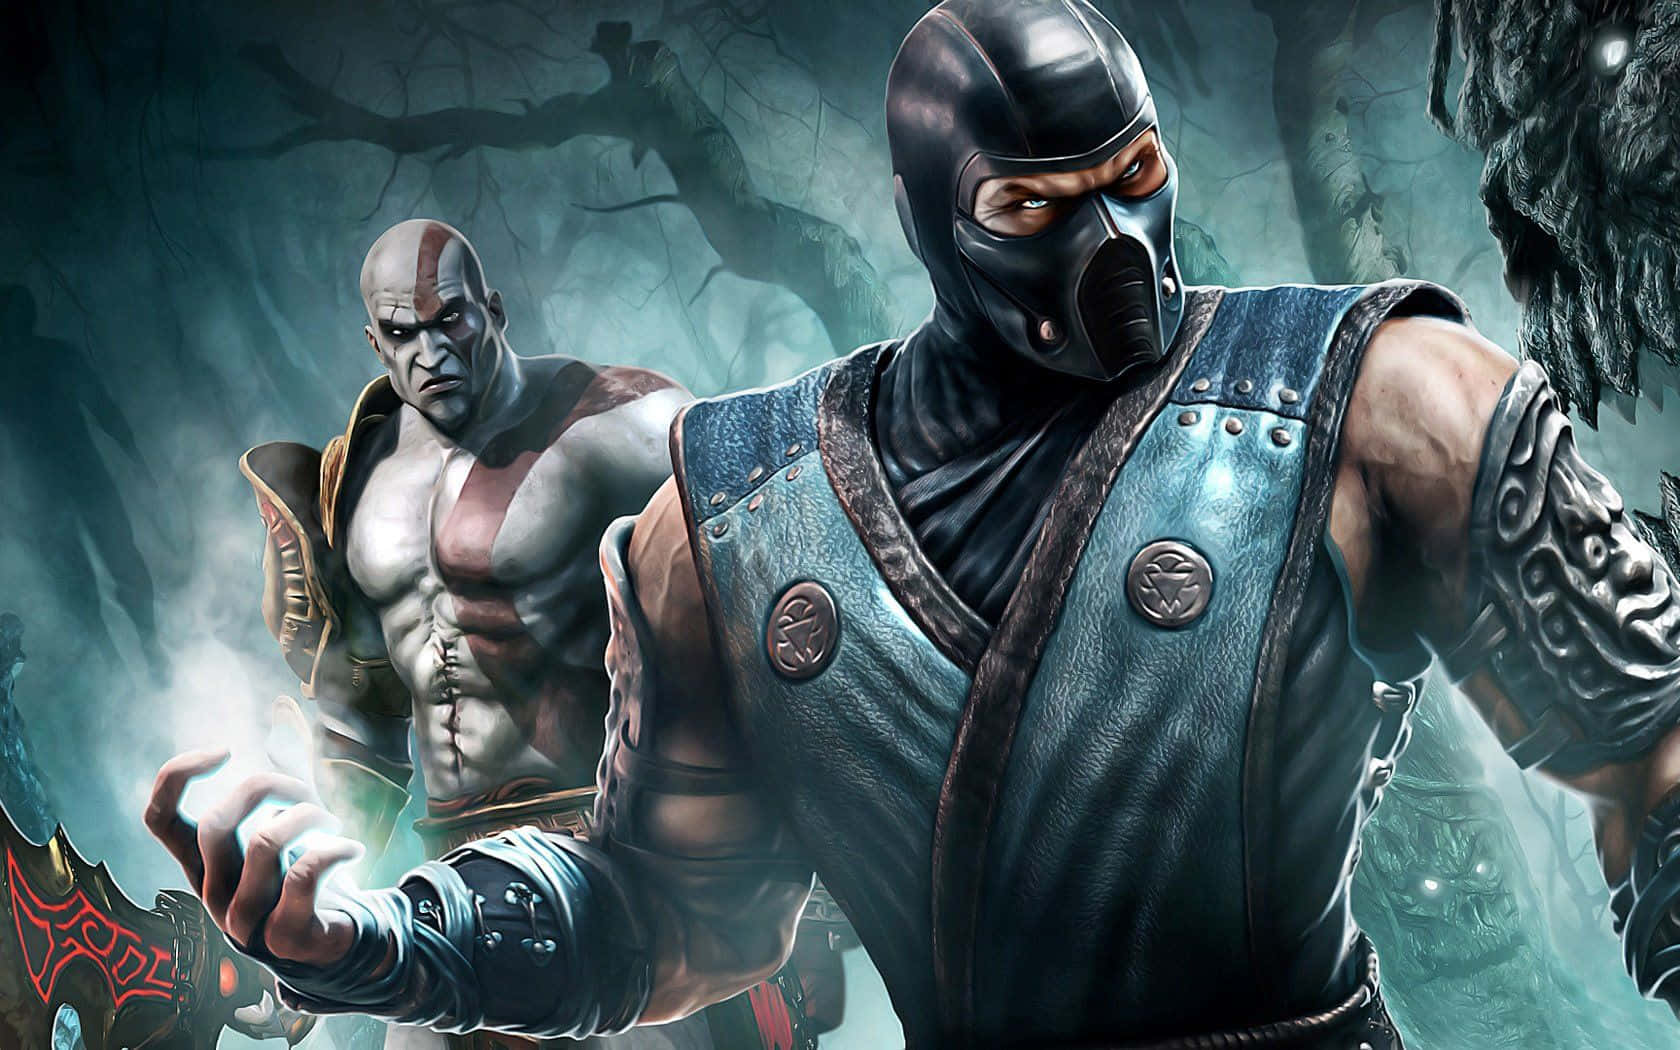 Fight Your Way To Victory in Mortal Kombat!